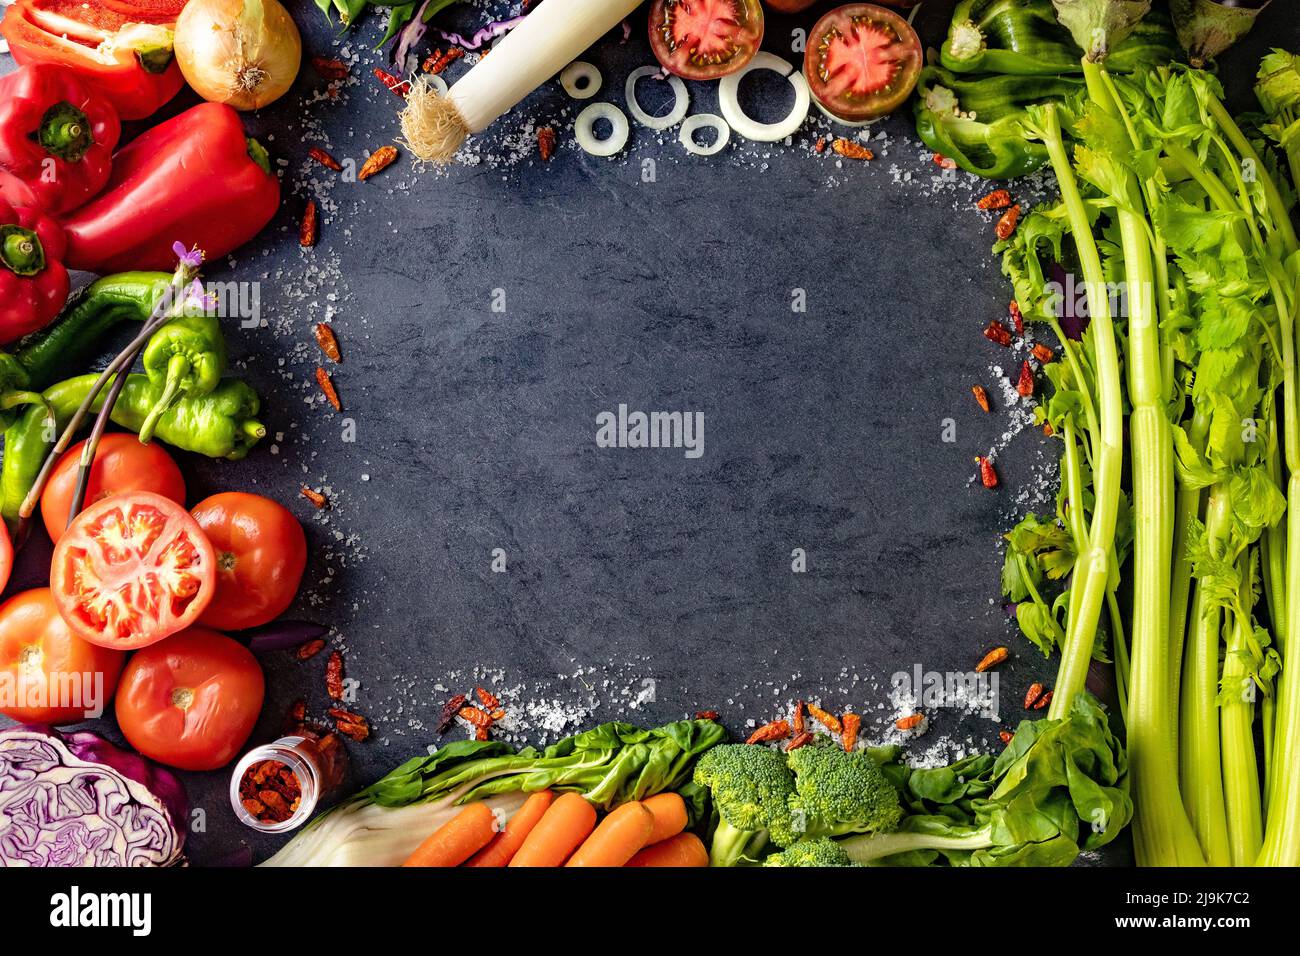 Healthy foods. Vegetables and fruits collection on black cement or stone background. Top view and copy space. Stock Photo